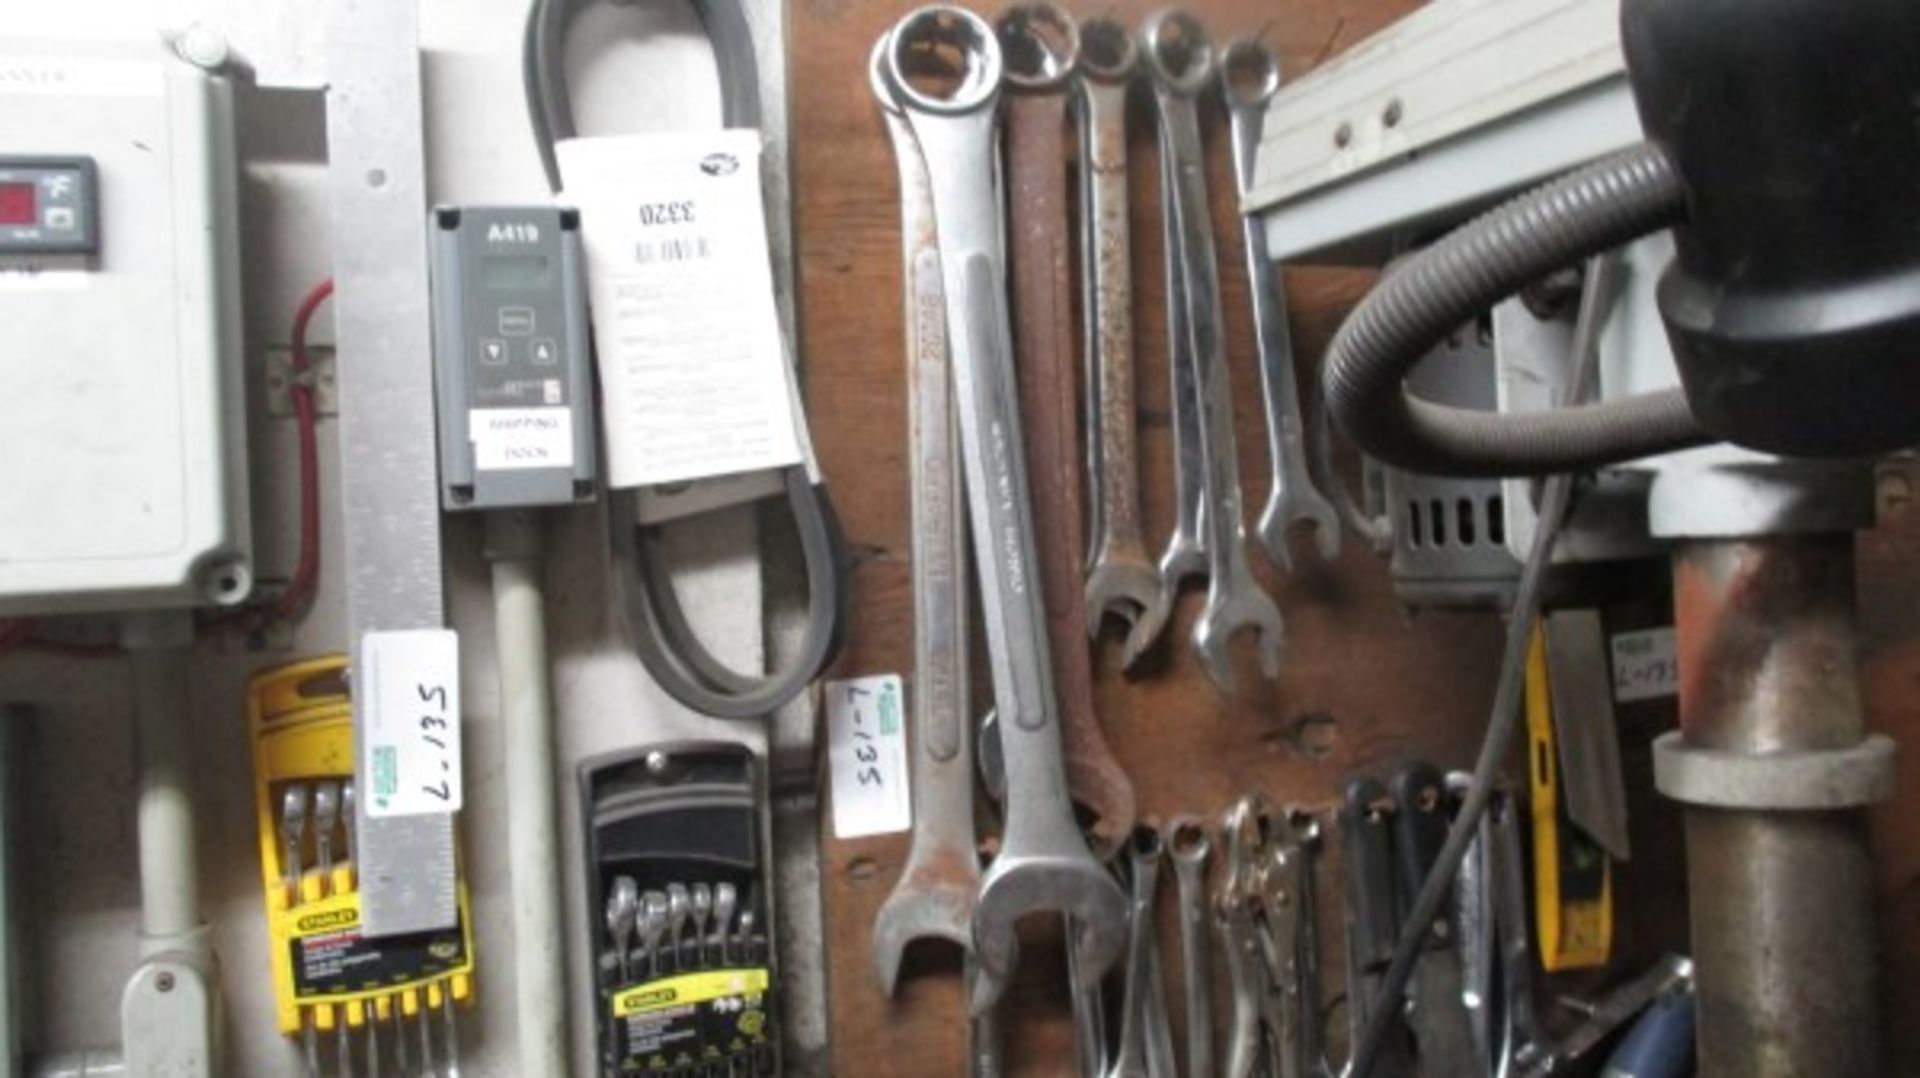 WALL HANGING LOT OF SCREWDRIVERS, WRENCHES, 2' SQUARE, VICE GRIPS ETC - Image 3 of 3